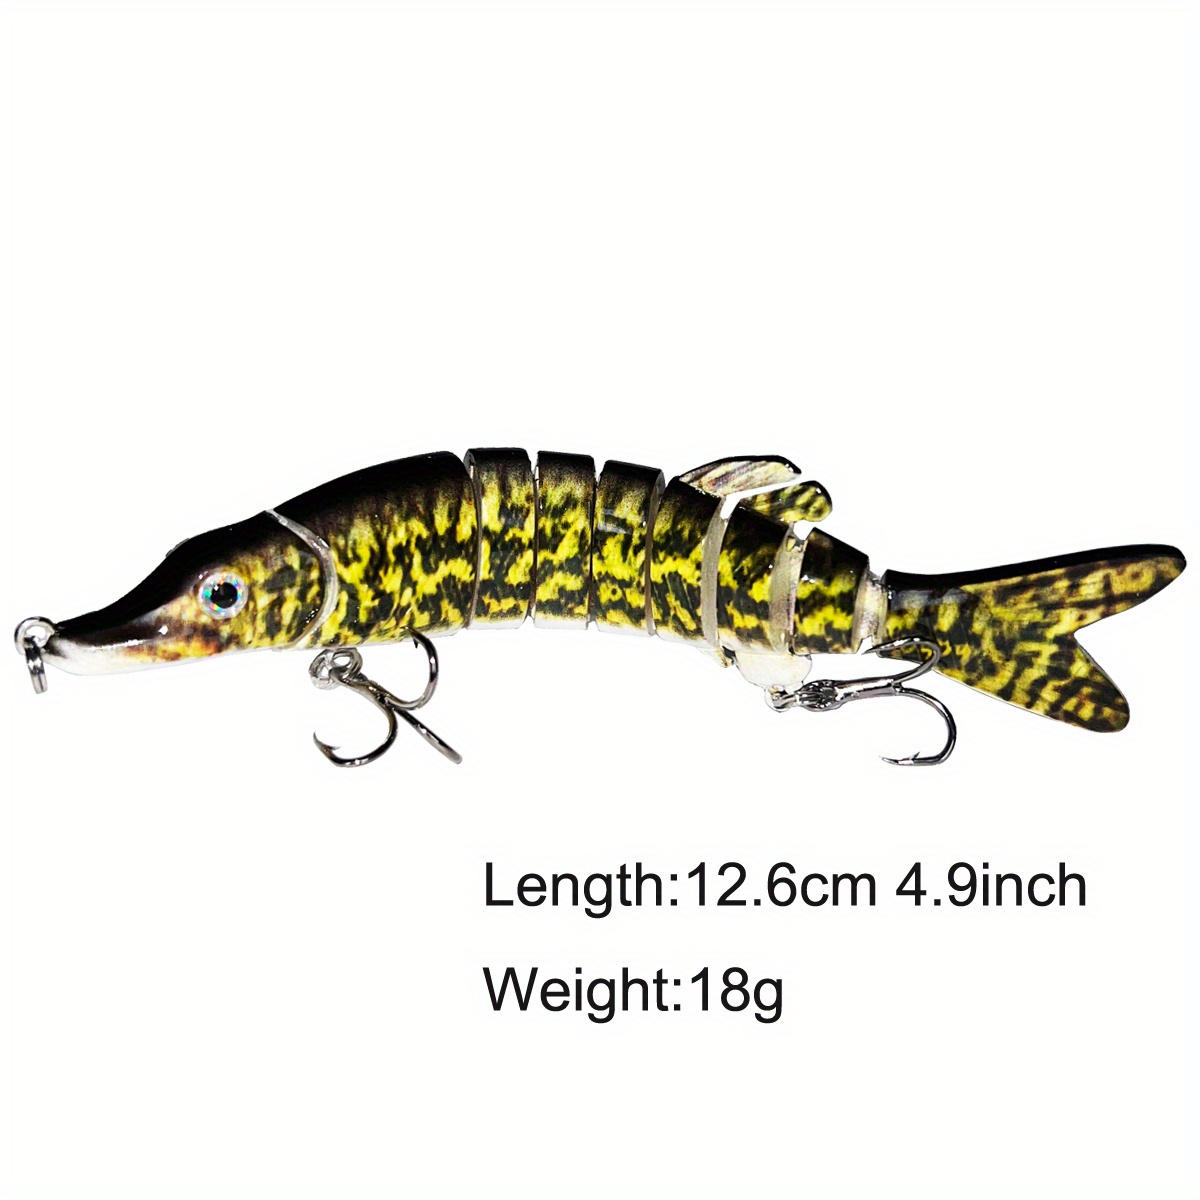 Father Pike Squidworx 3 Tail Soft Rubber Pike Slayer, Pike Lure, Soft Bait,  Fishing Lure, Fresh Water, Salt Water, Muskie, Predator Fish, Trophy